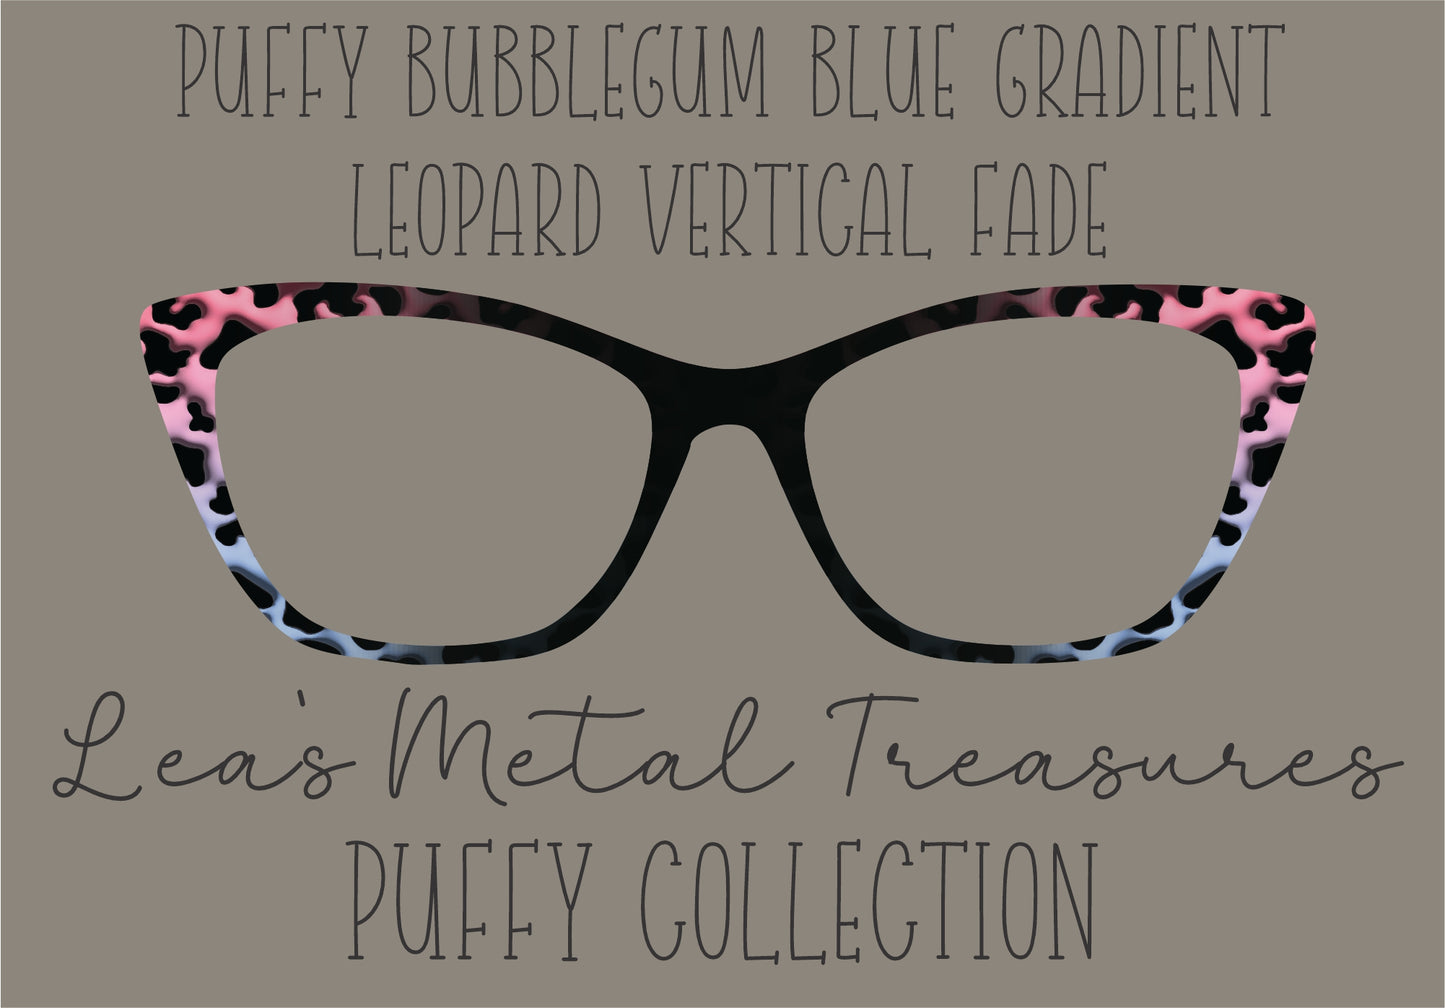 PUFFY BUBBLEGUM BLUE GRADIENT LEOPARD VERTICAL Eyewear Frame Toppers COMES WITH MAGNETS